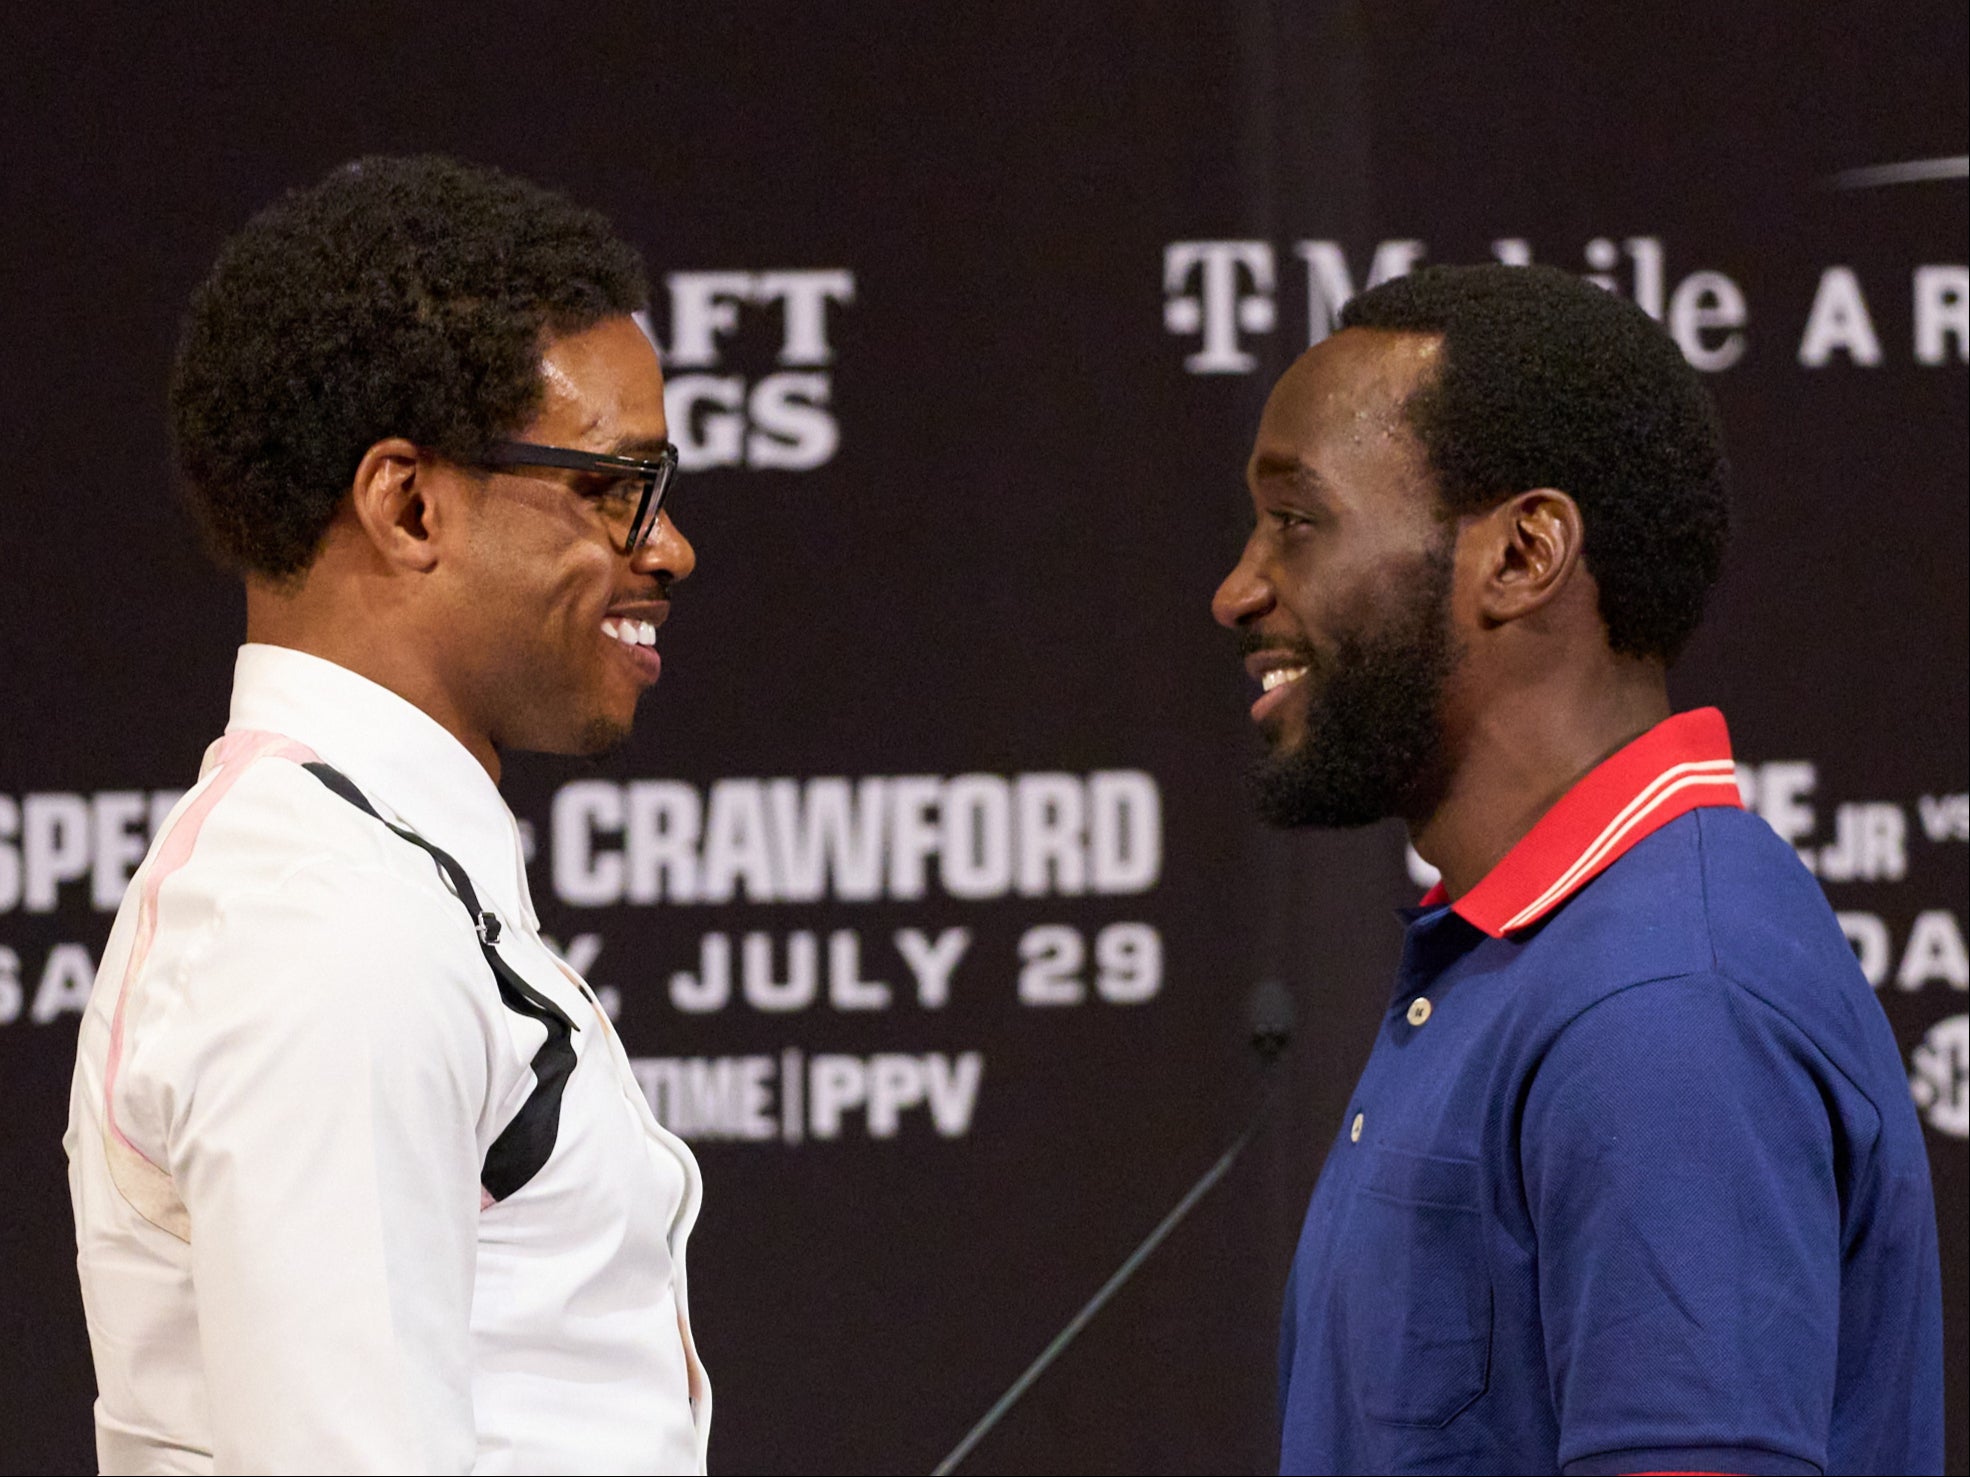 Errol Spence vs Terence Crawford live stream How to watch fight online and on TV tonight The Independent